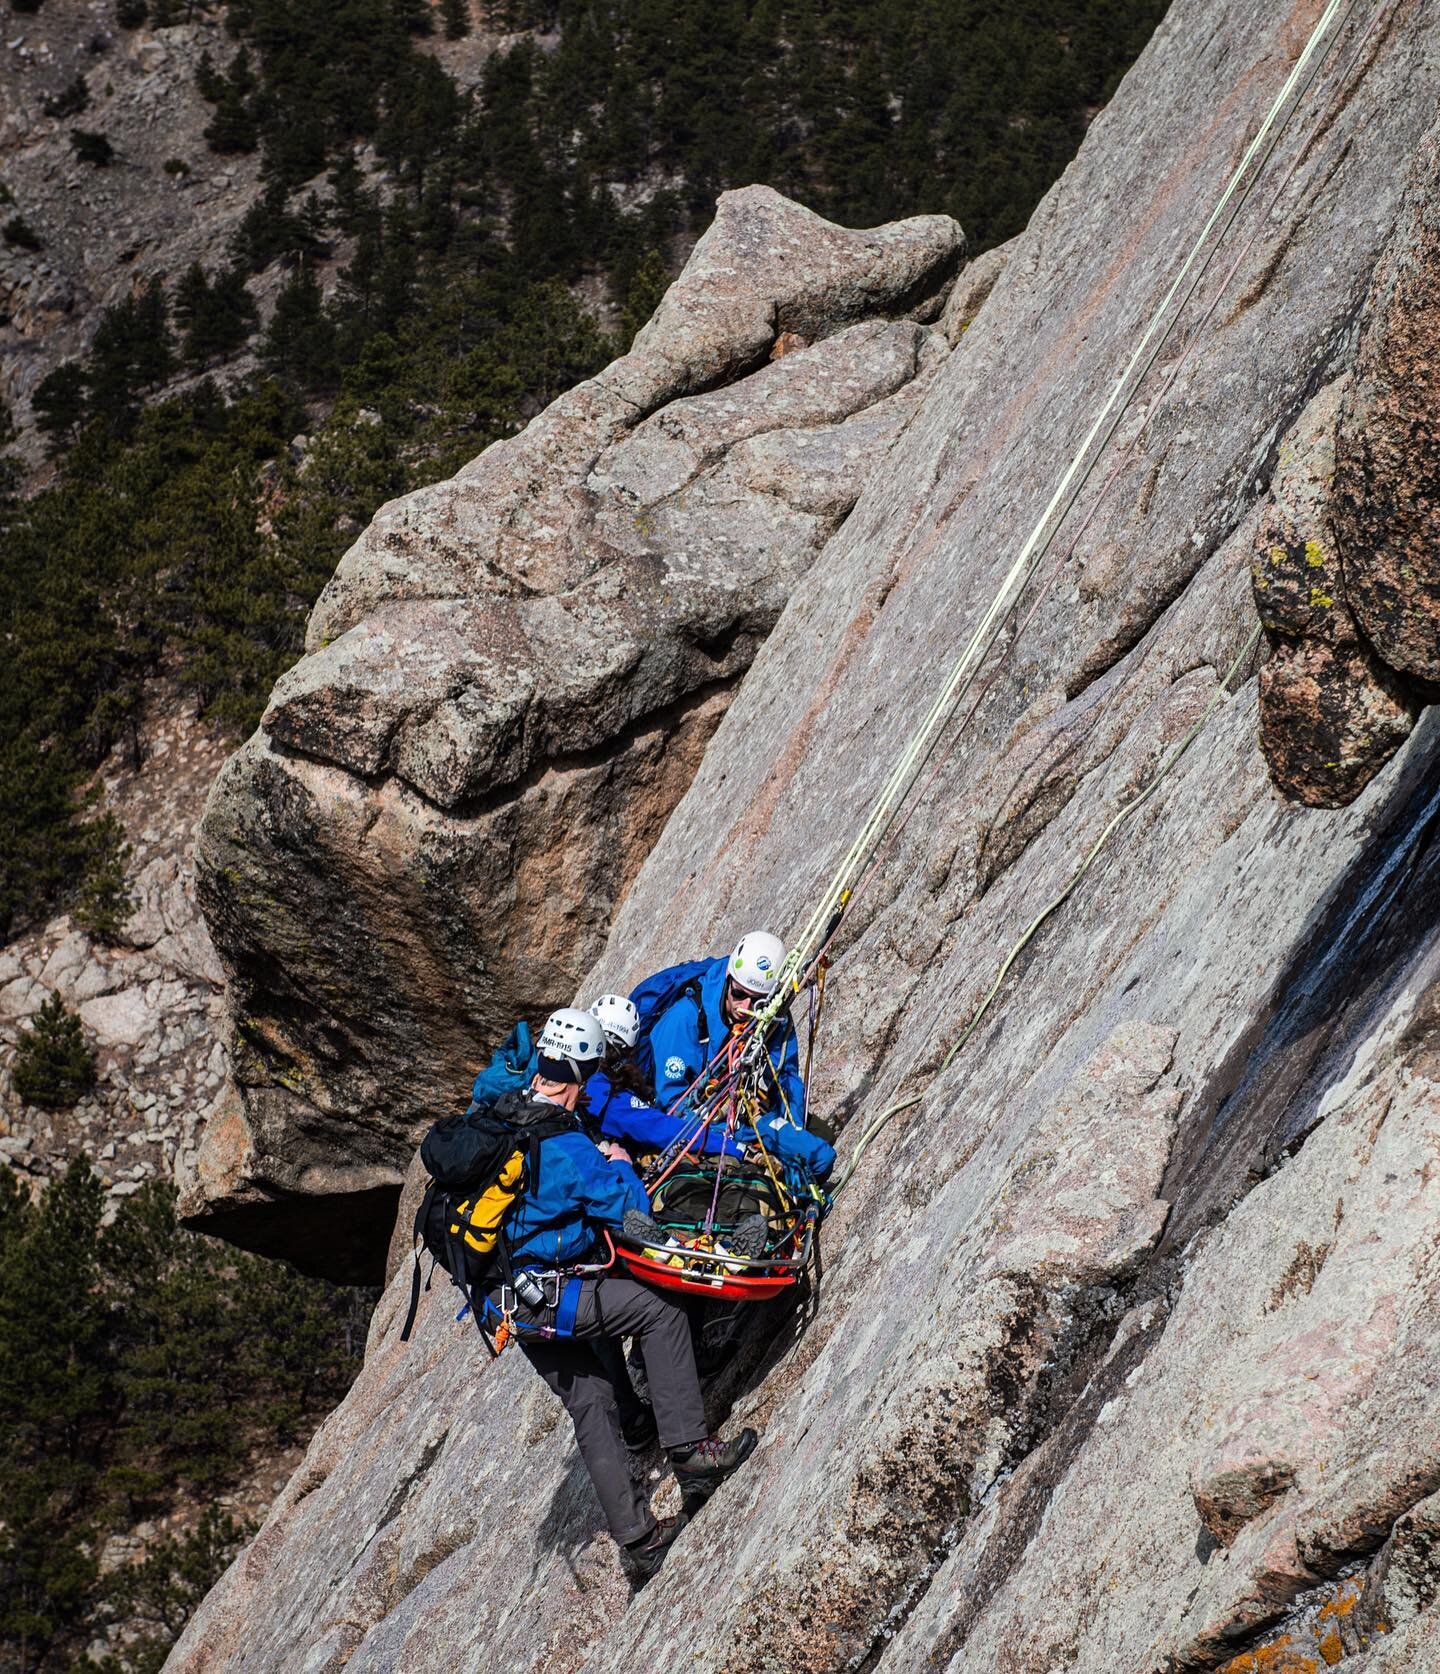 High-angle vertical evacuation training in Boulder Canyon. Rocky Mountain Rescue practices speed and mastery of complex rope systems by doing laps up and over Elephant Buttress in Boulder Canyon, simulating rescue scenarios in vertical terrain. Our m